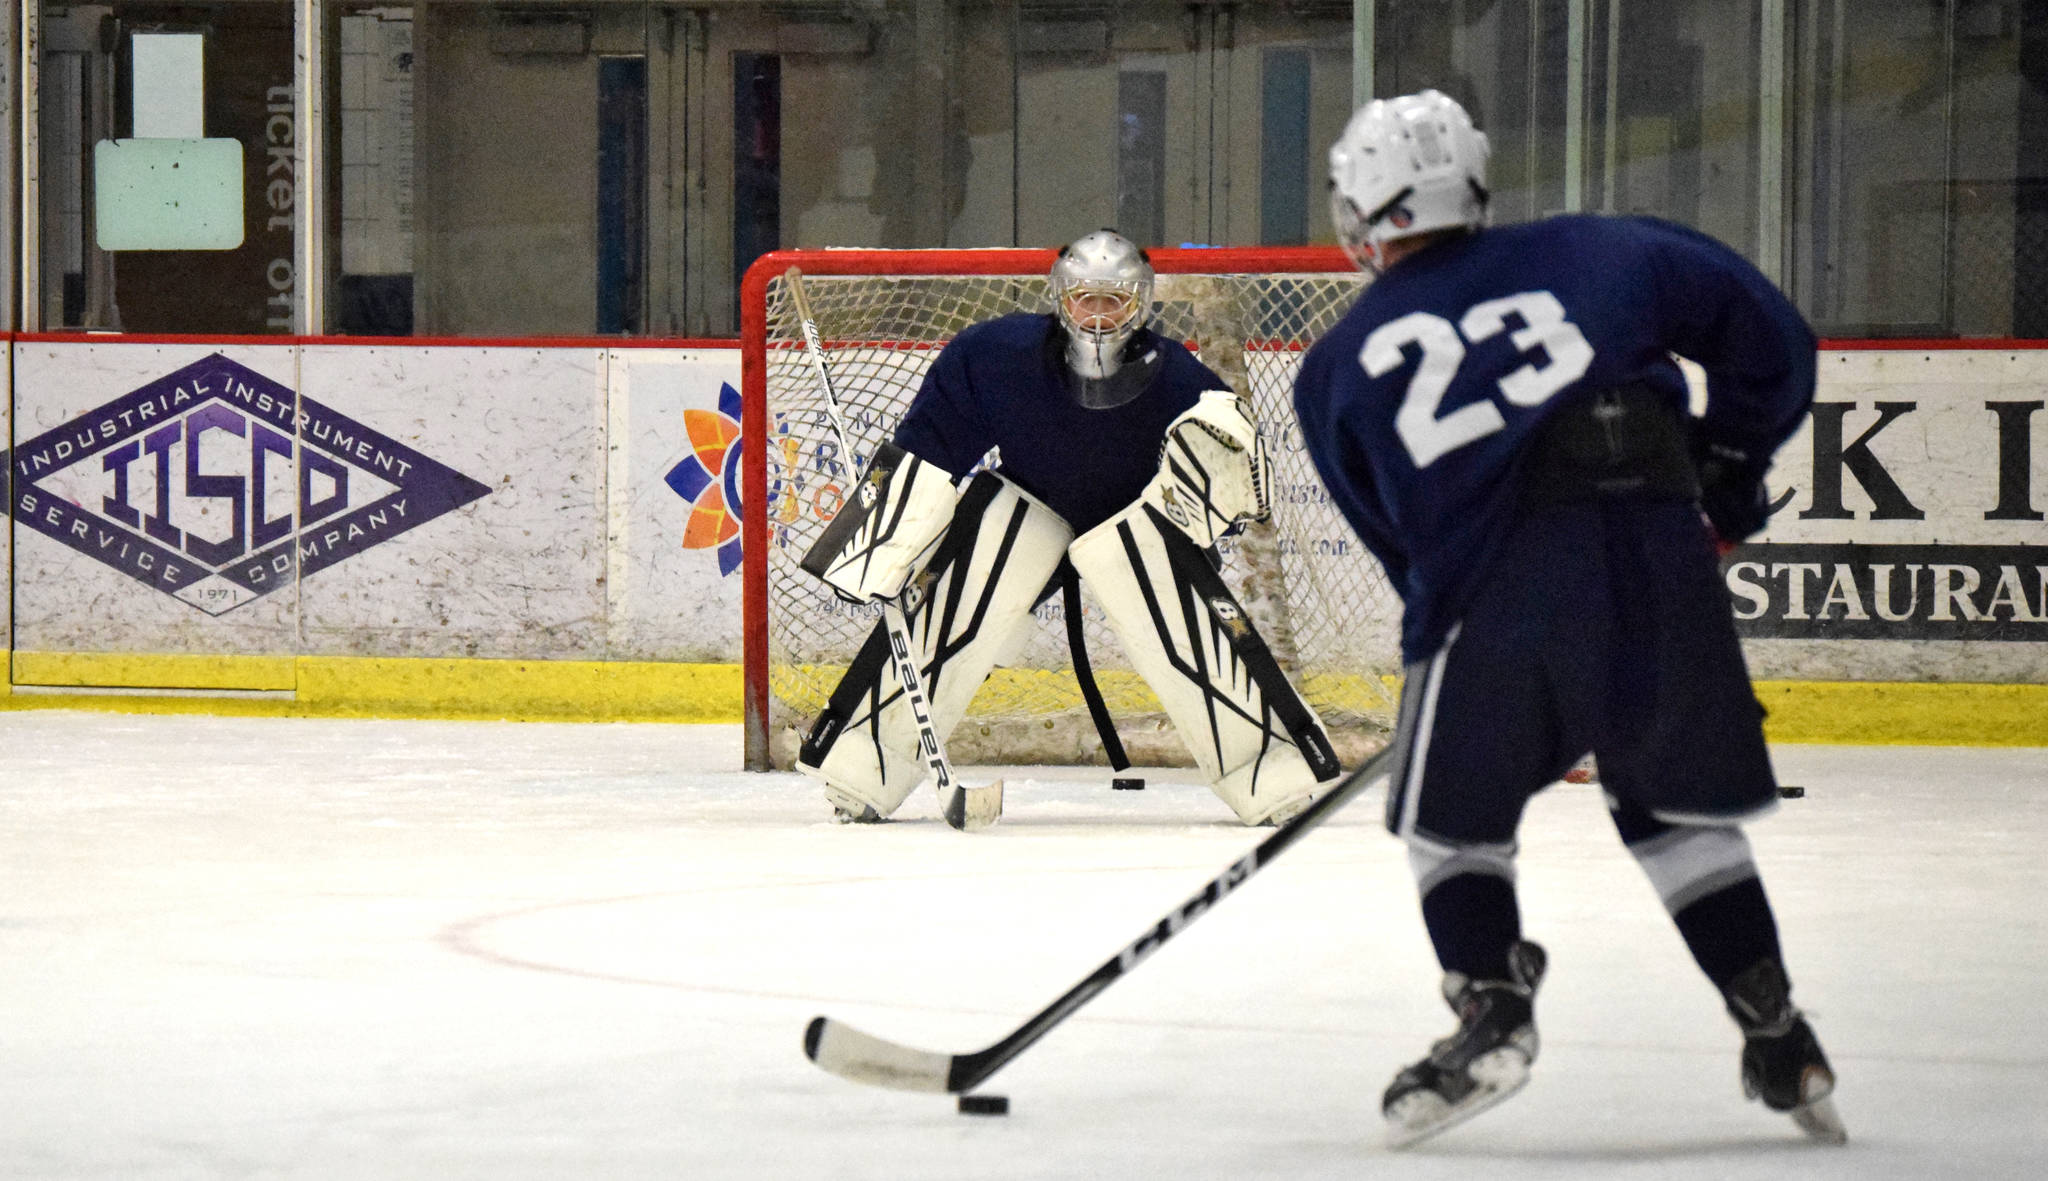 A goalie from Soldotna High School’s Soldotna Stars hockey team prepares to block a teammate’s shot during a practice on Monday, Nov. 13 at the Soldotna Regional Sports Complex in Soldotna. (Ben Boettger/Peninsula Clarion)